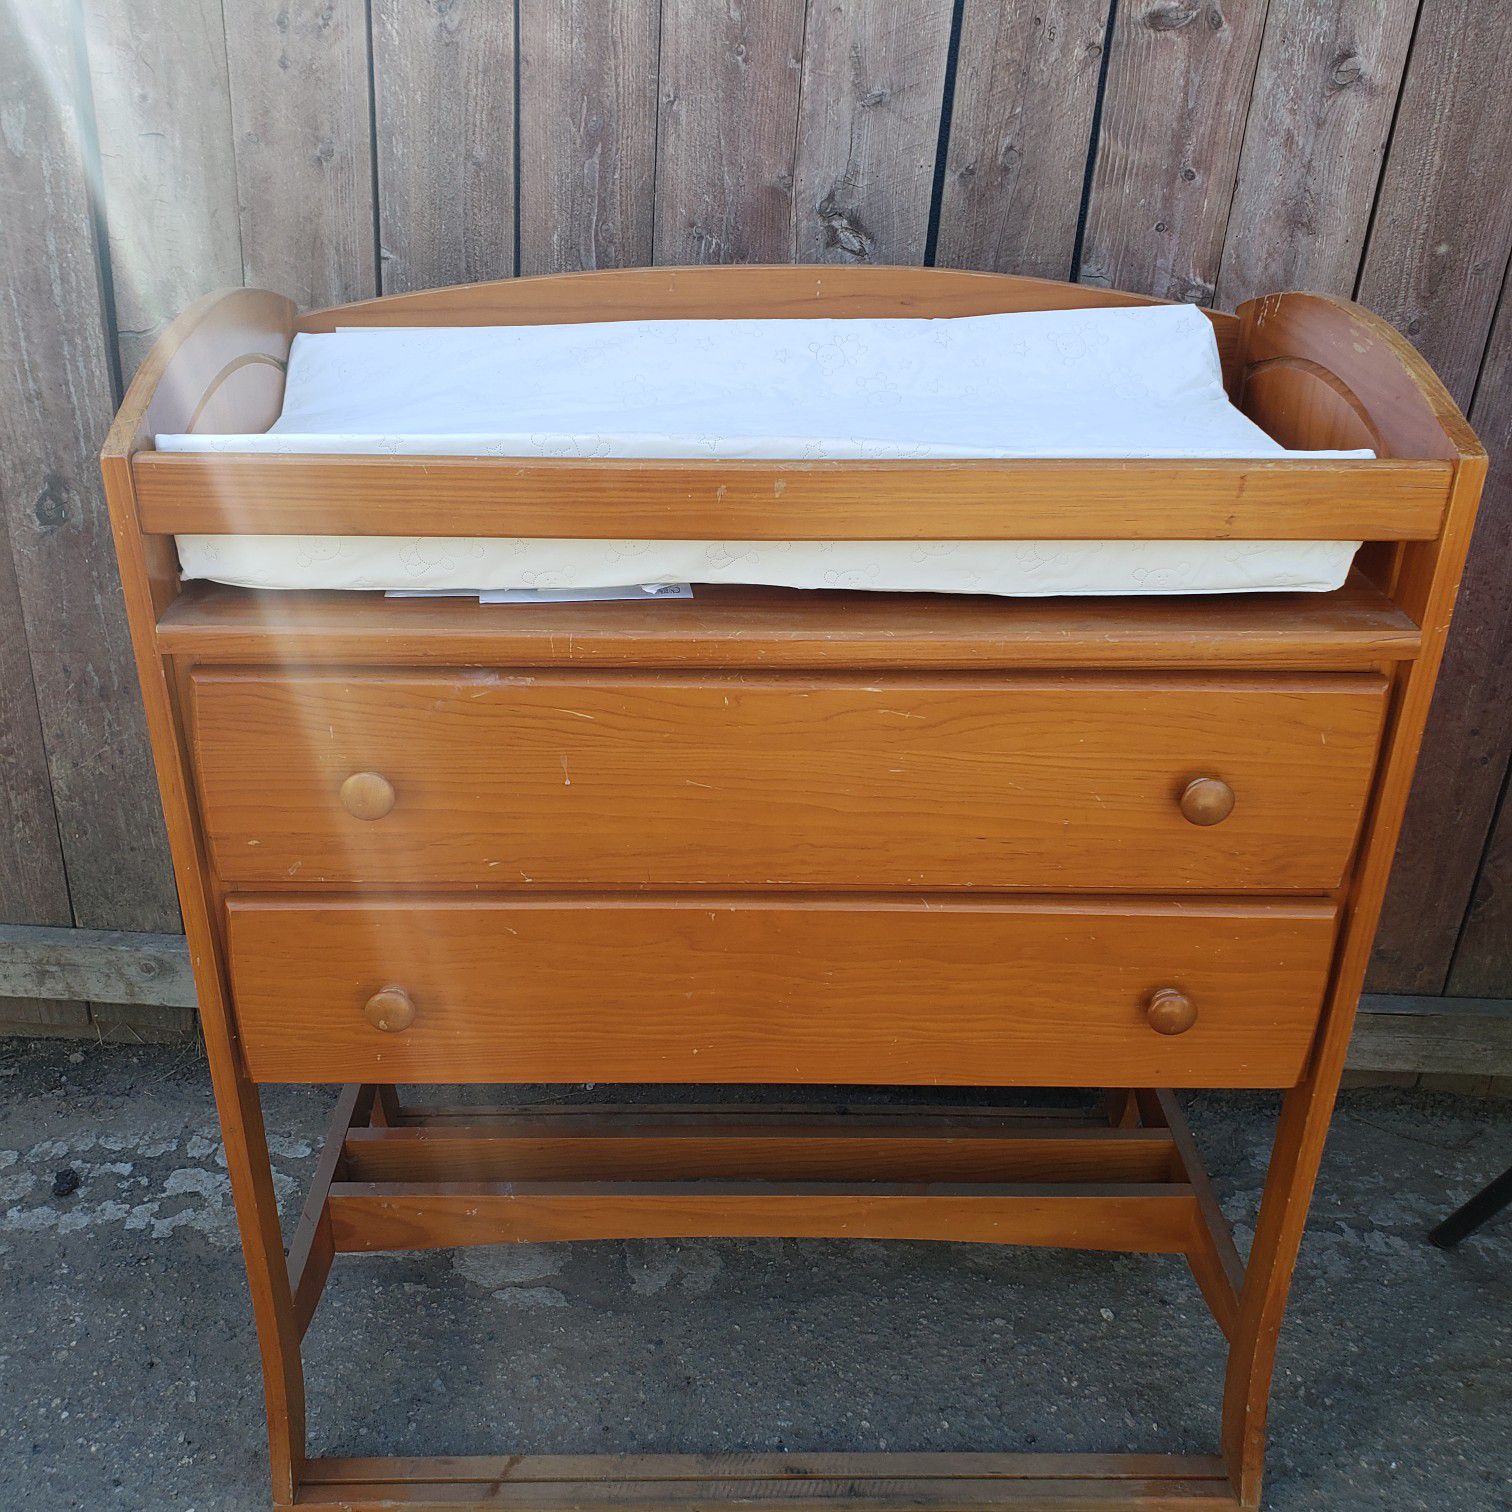 FREE Baby changing table with drawer